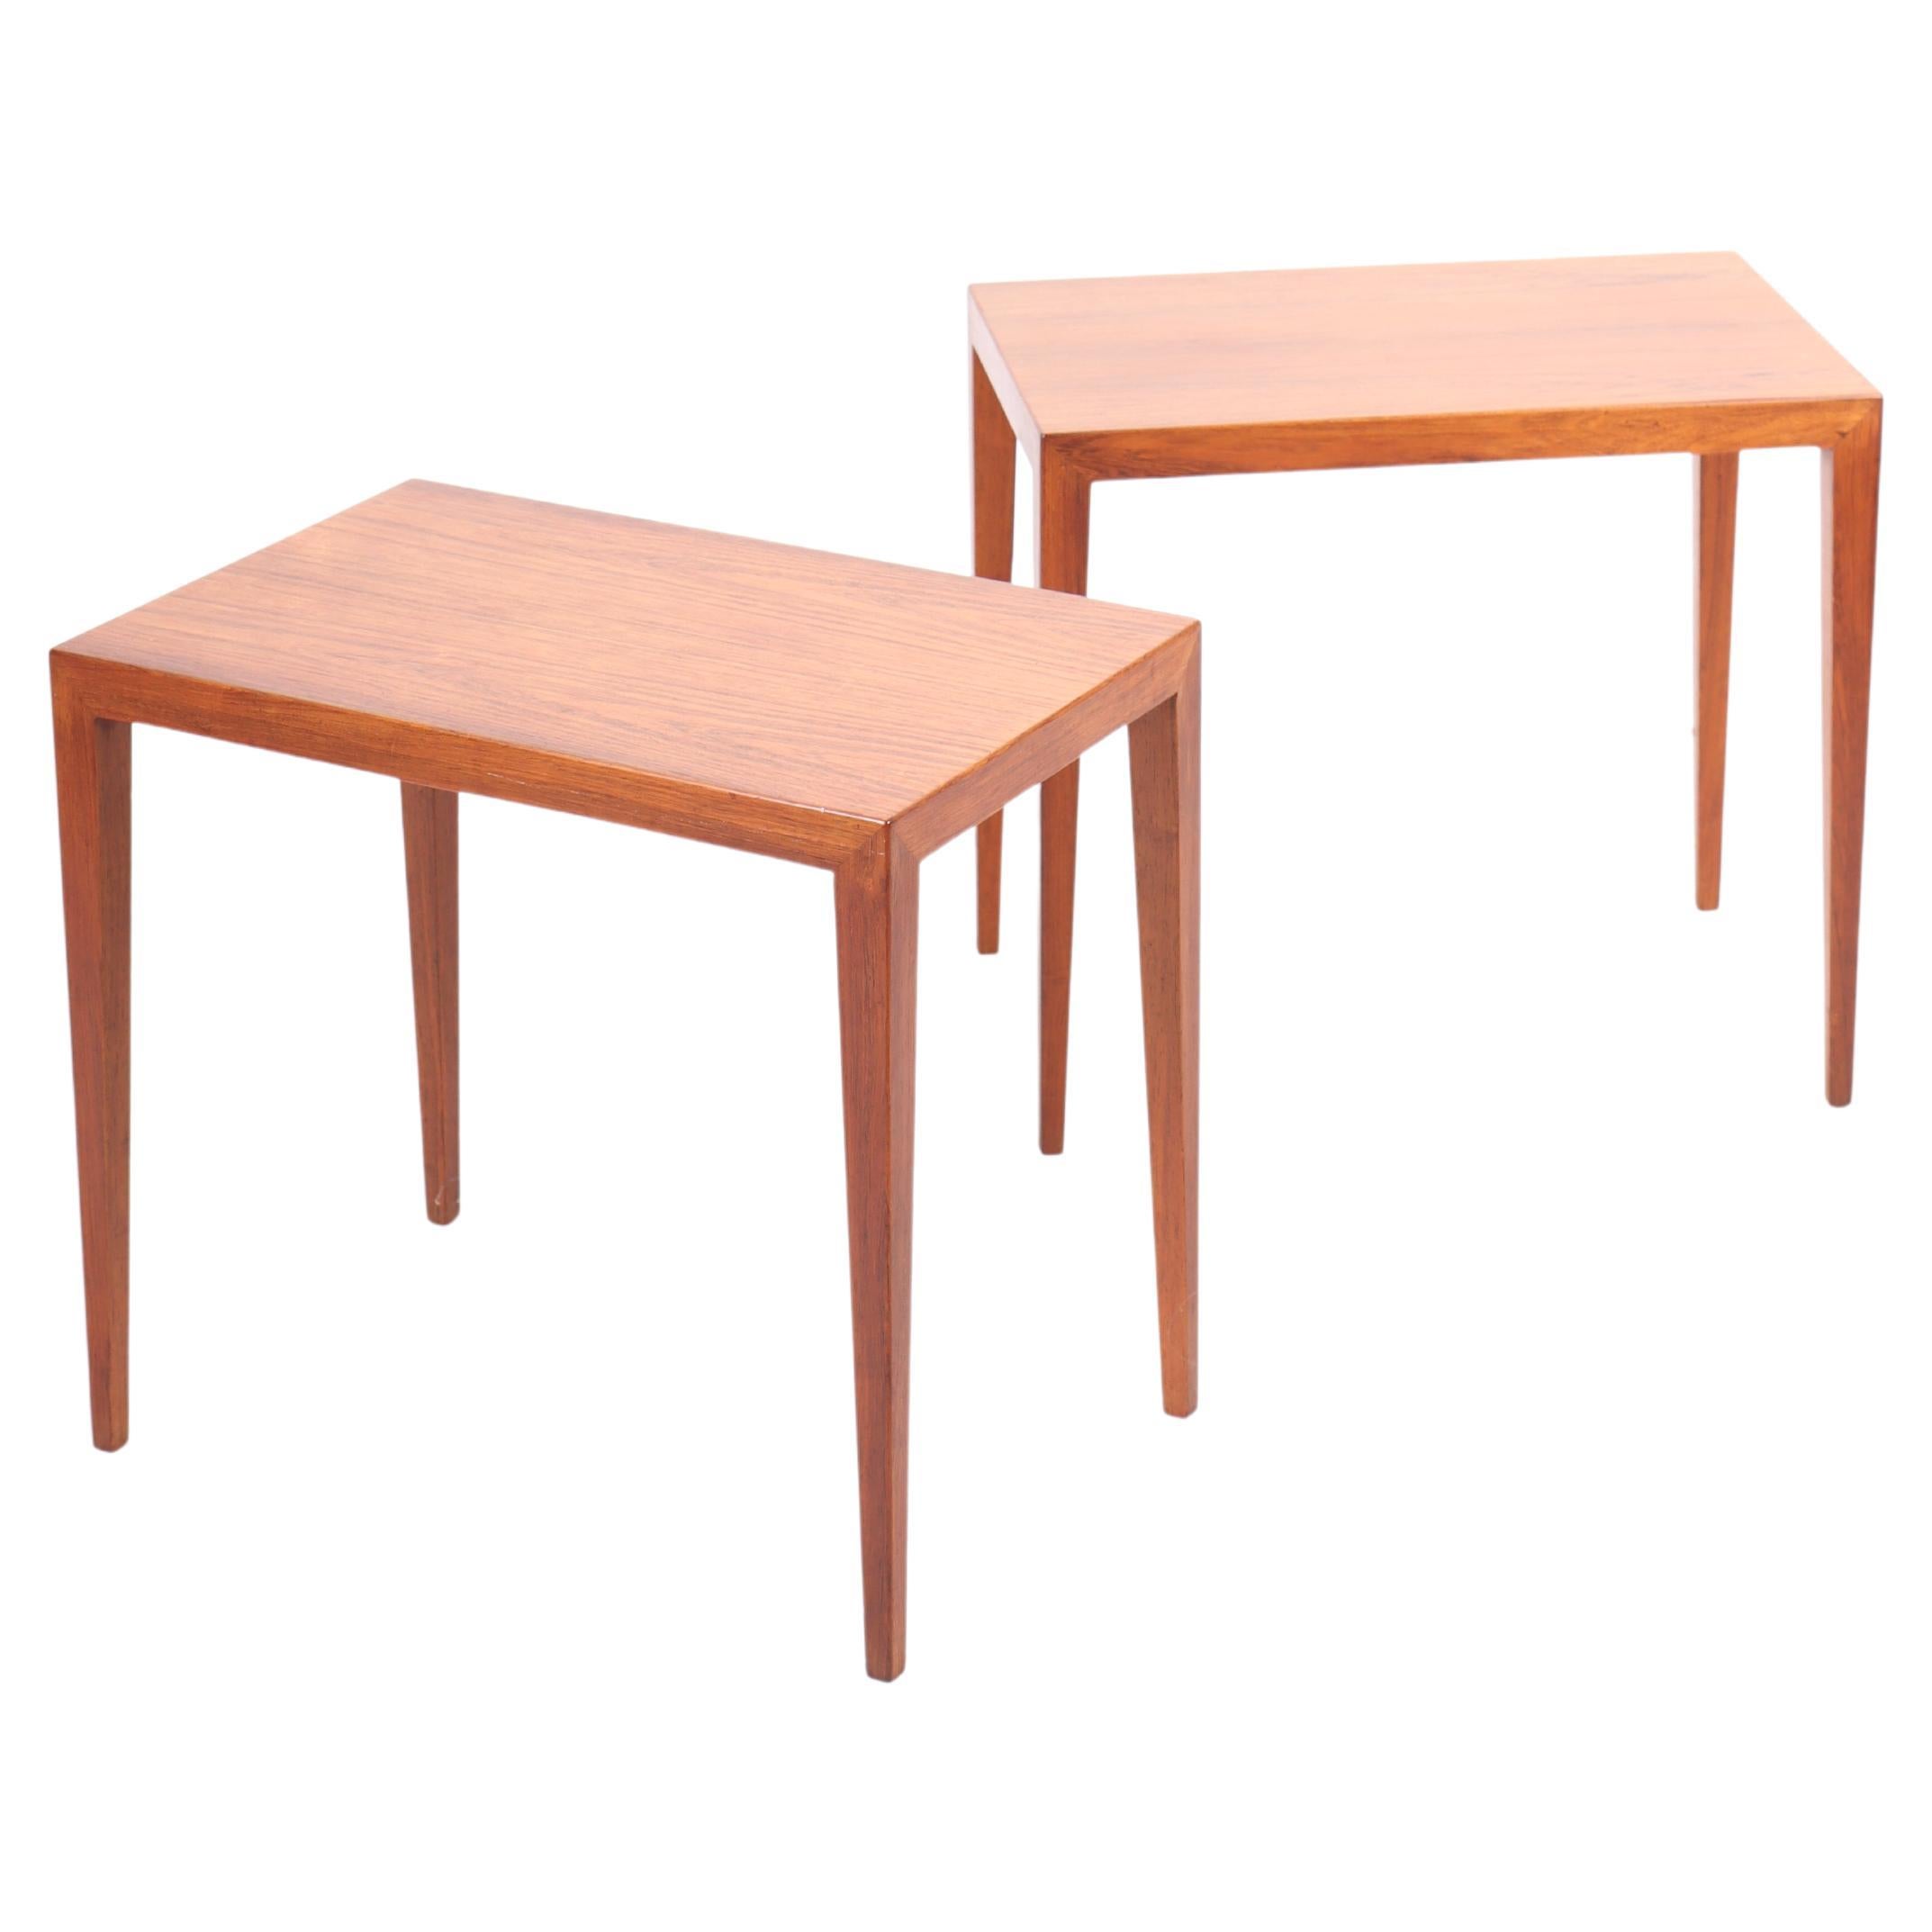 Pair of Midcentury Side Tables in Rosewood by Haslev, Danish Design, 1960s For Sale